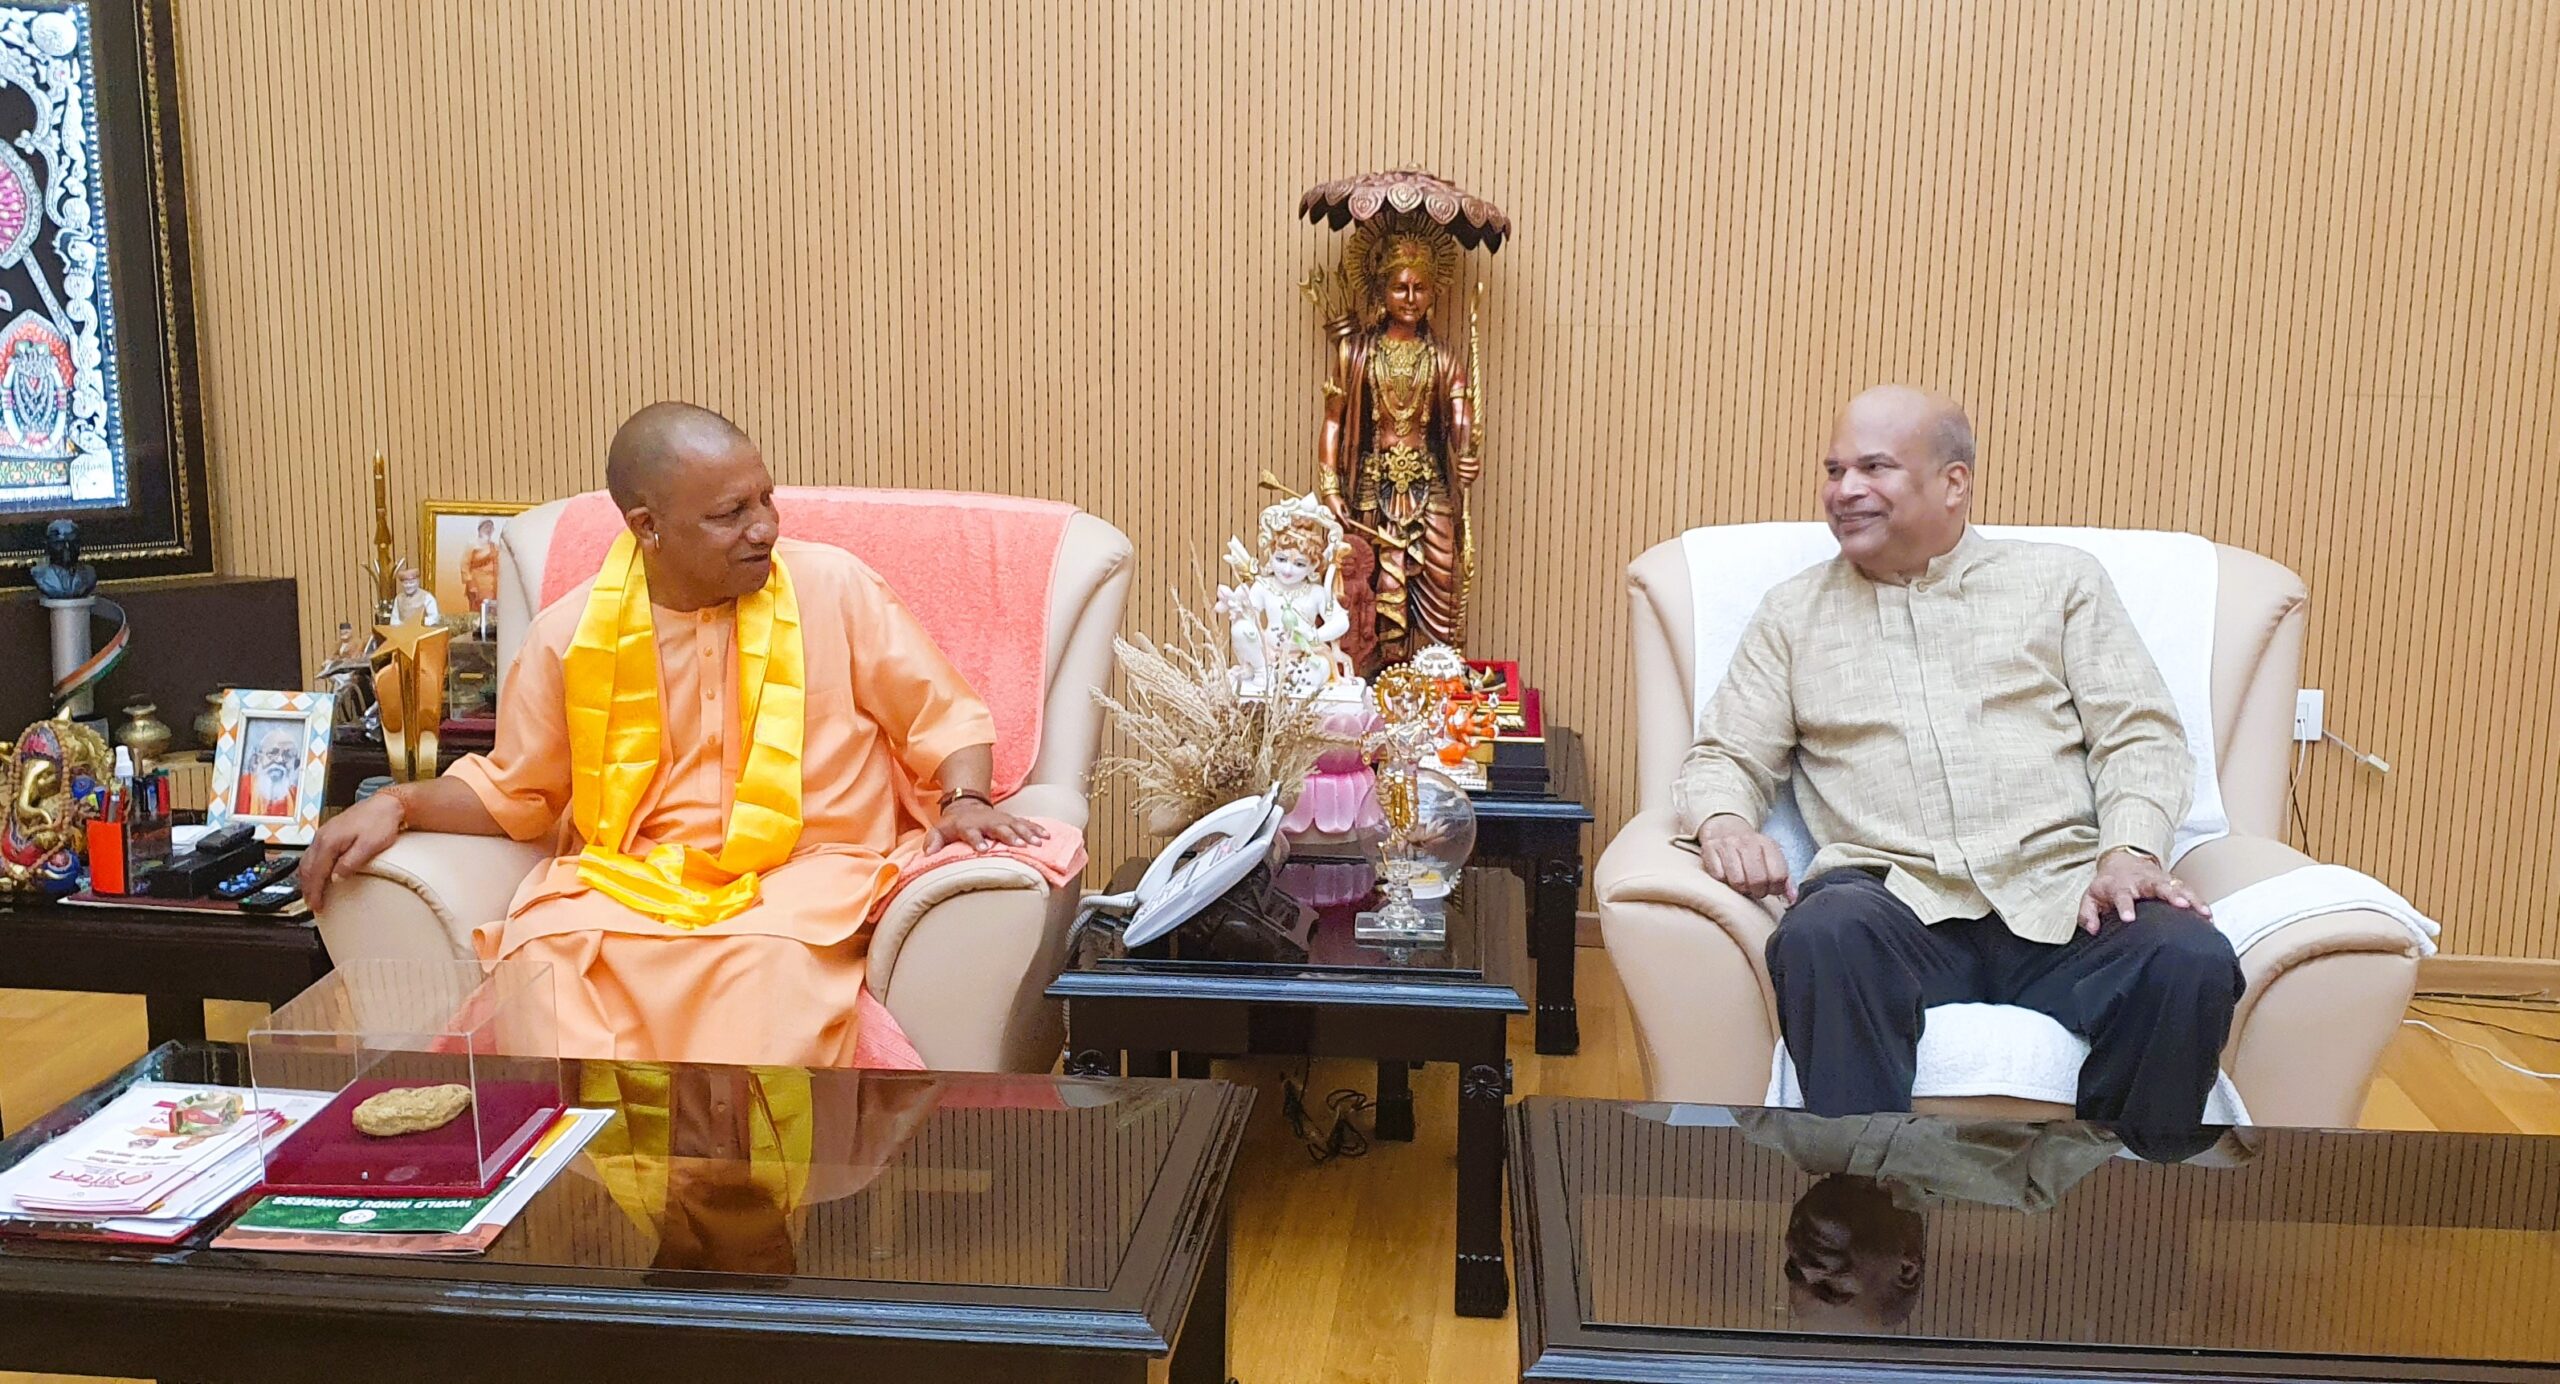 Sri Lanka and Uttar Pradesh resolve to further strengthen tourism, cultural and religious exchanges